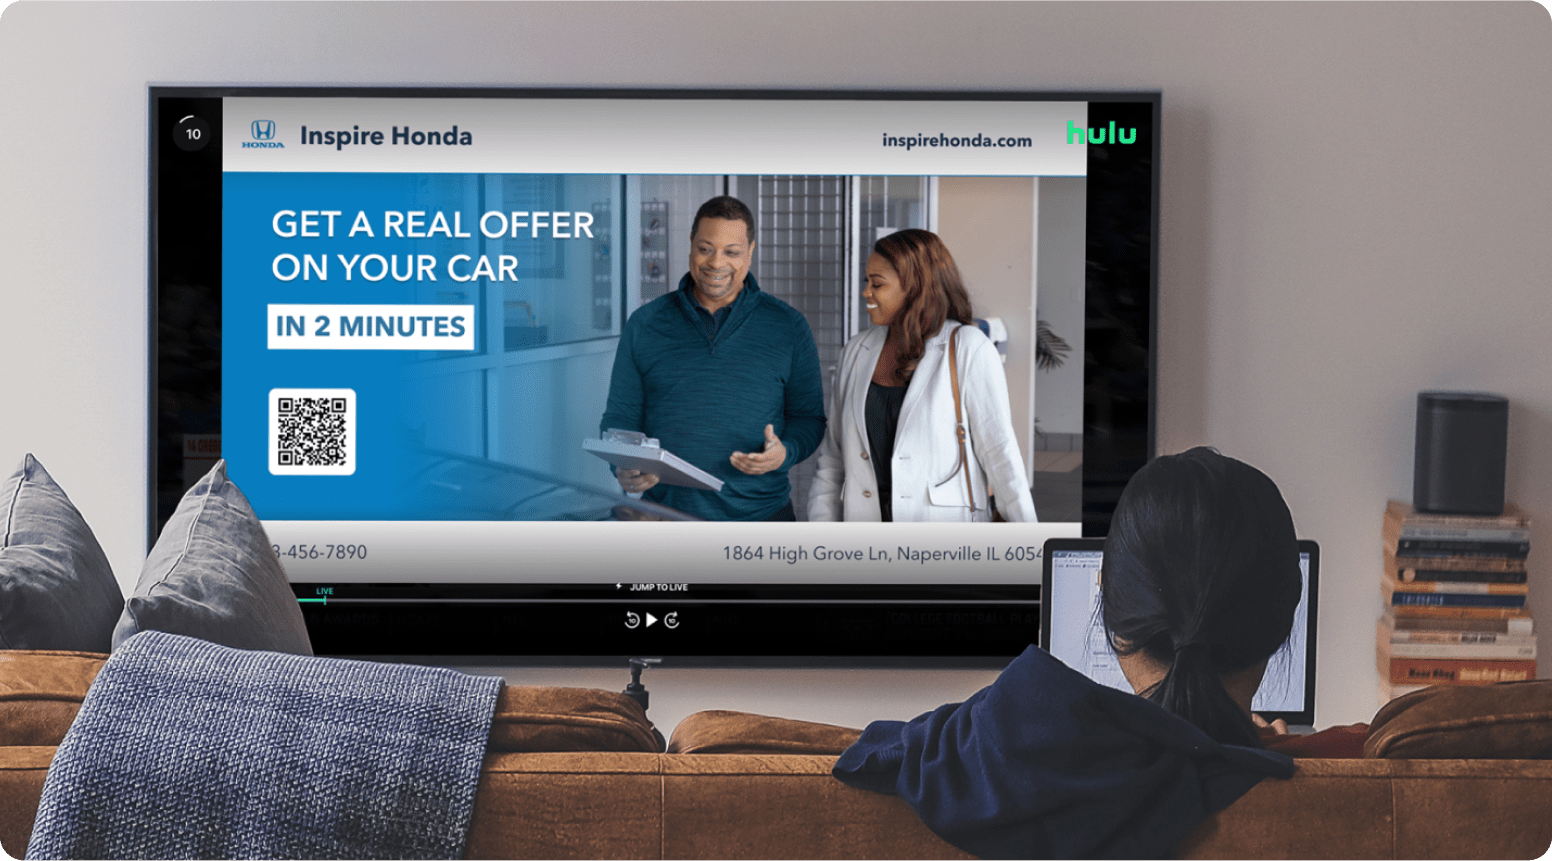 Dealership TV ad, 'get a real offer on your car' followed by a Accutrade QR code.